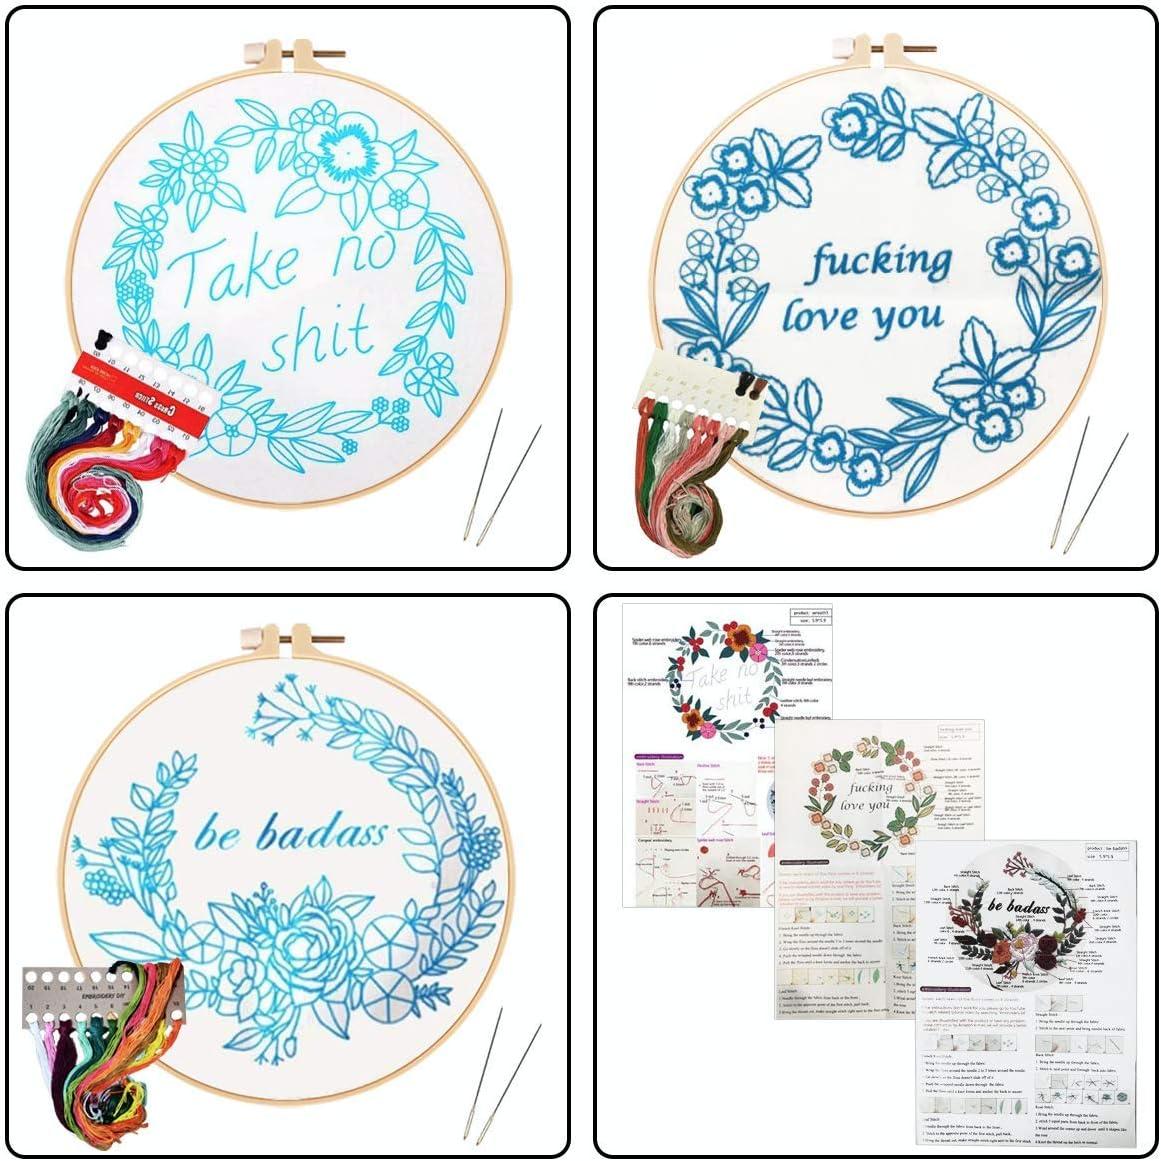 Full Range of Embroidery Starter Kits, Floral Handmade Needlepoint Kits  with Pattern for DIY Beginners Adults Kids, Valentine's